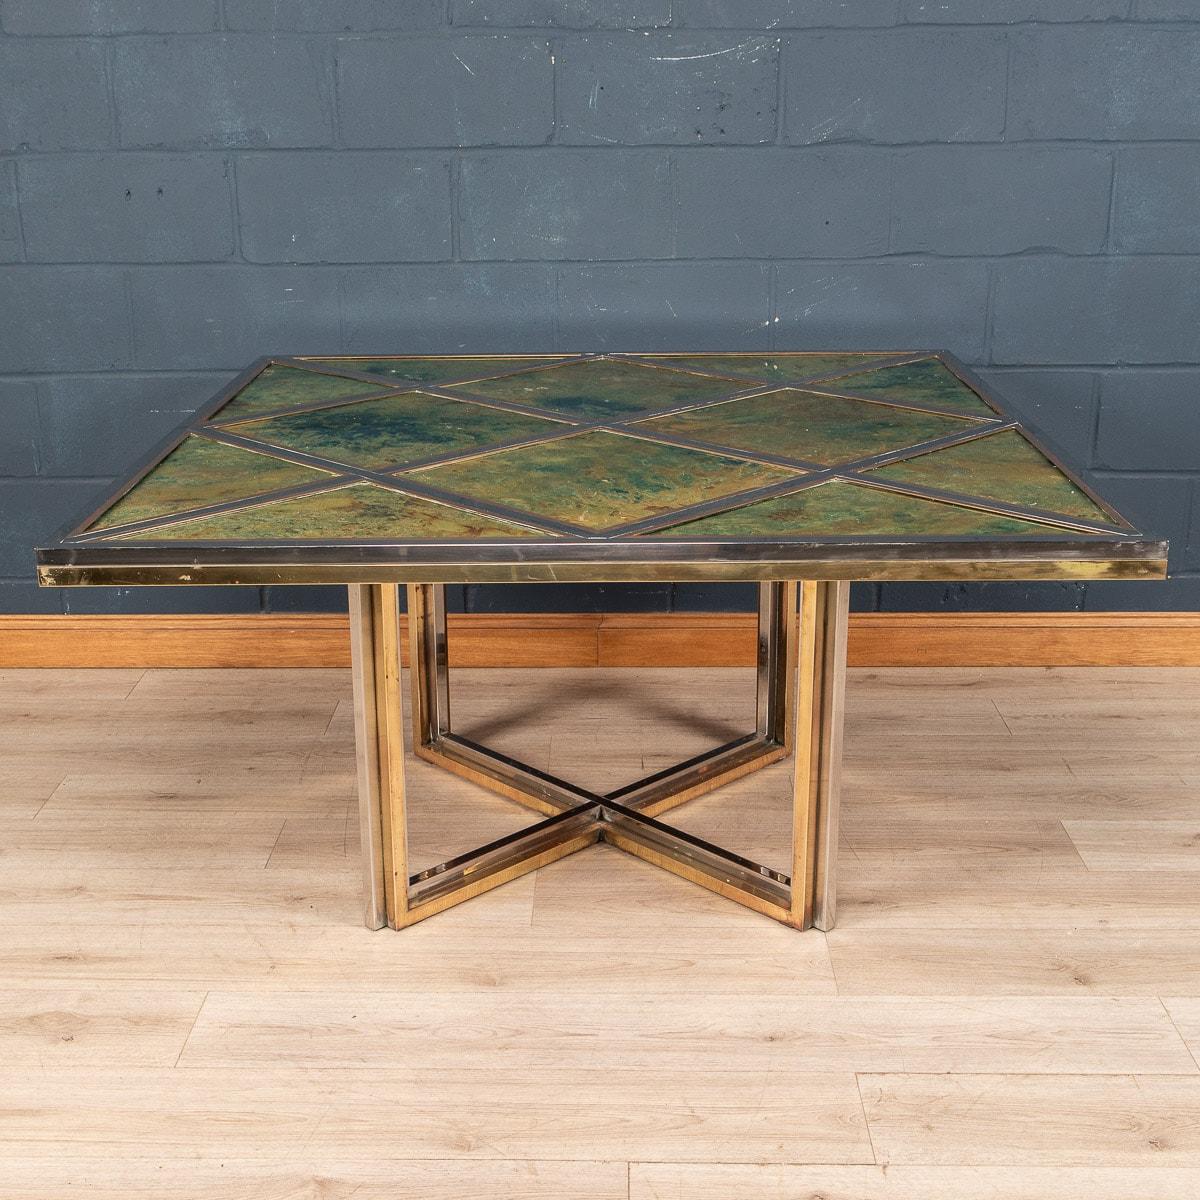 A stunning dining table or centre table designed by Romeo Rega for Metalarte, made in Italy in the 1970s. The table structure is made entirely out of brass and chrome, the top of which has brass framed glass tiles.

Condition
In good condition -